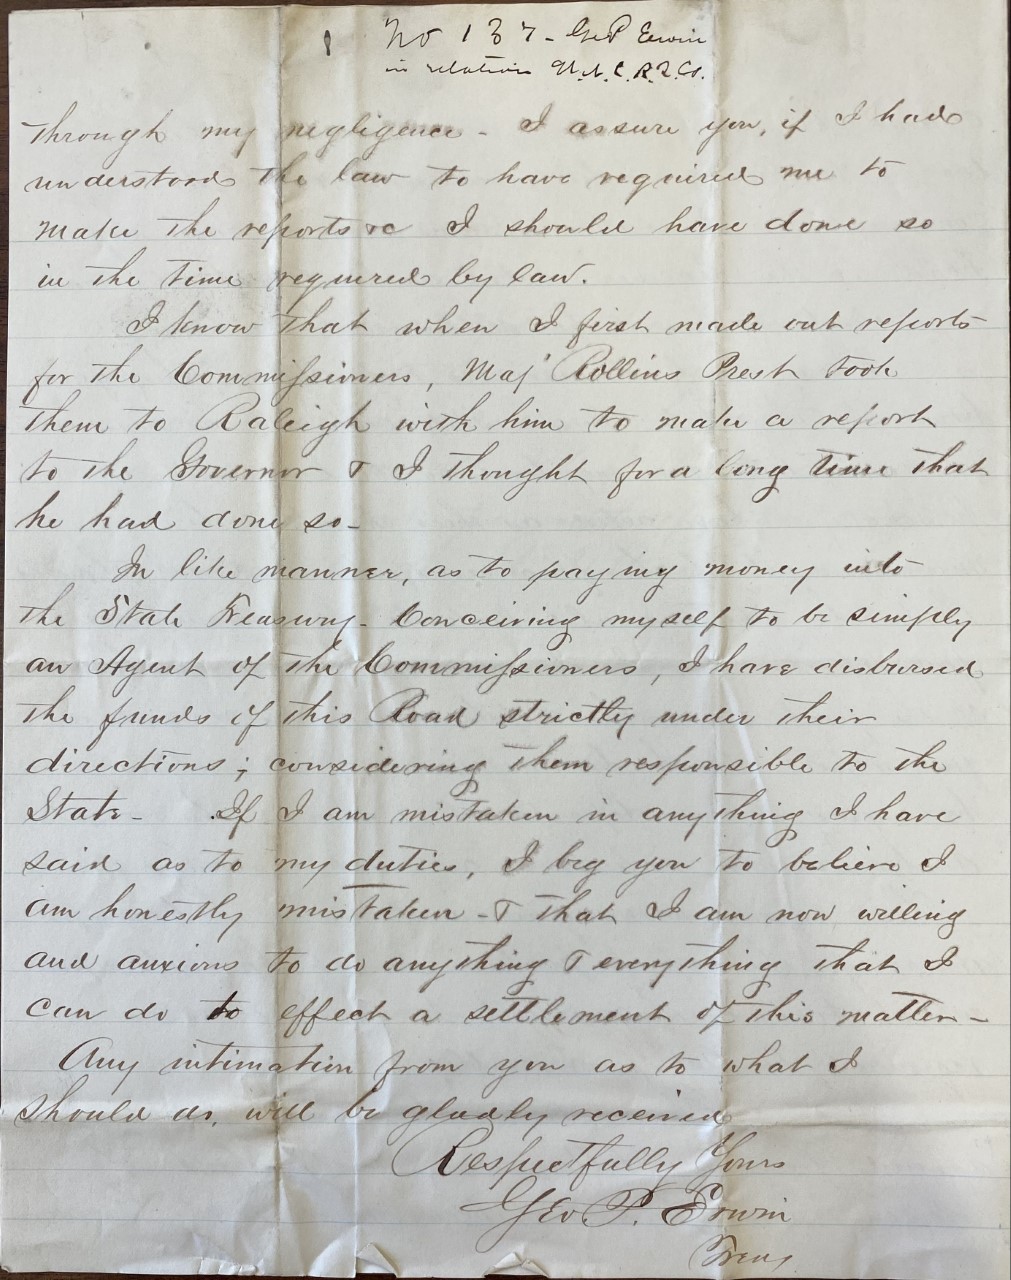 Page 3 of letter from Geo. P. Erwin to ZBV, March 16, 1877